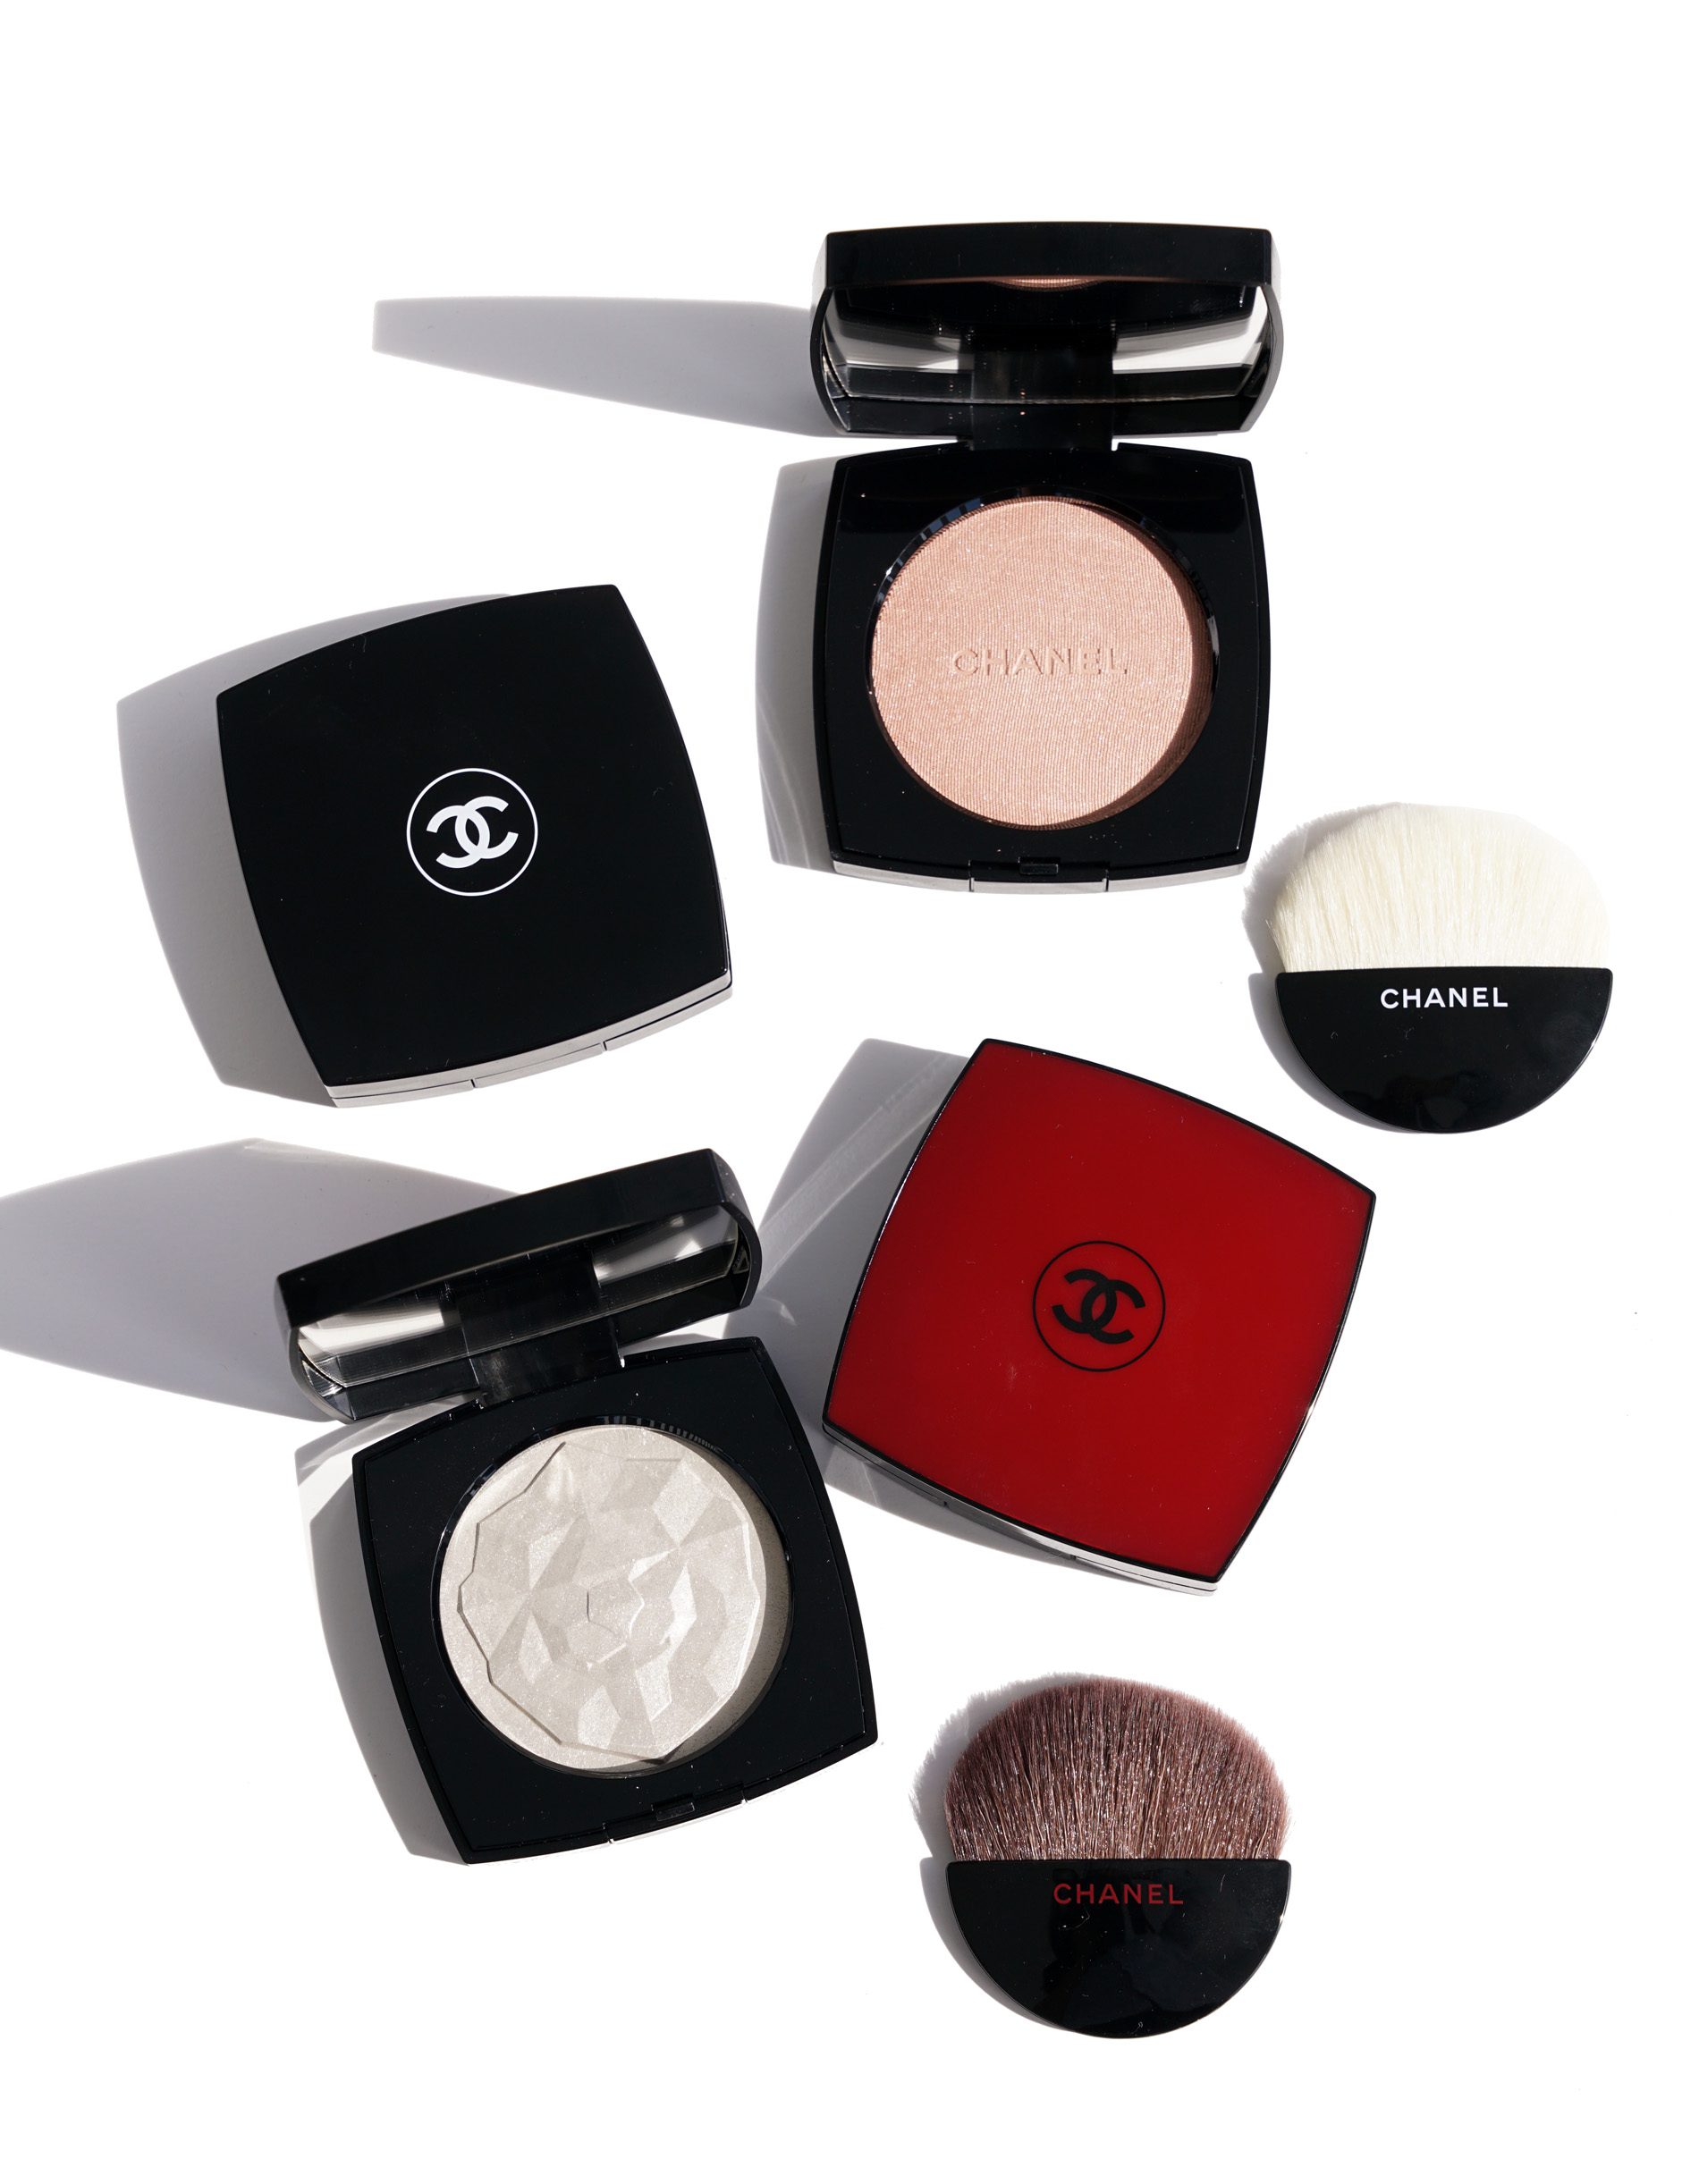 Chanel Highlighters Poudre Lumiere and Le Signe du Lion - The Beauty Look  Book